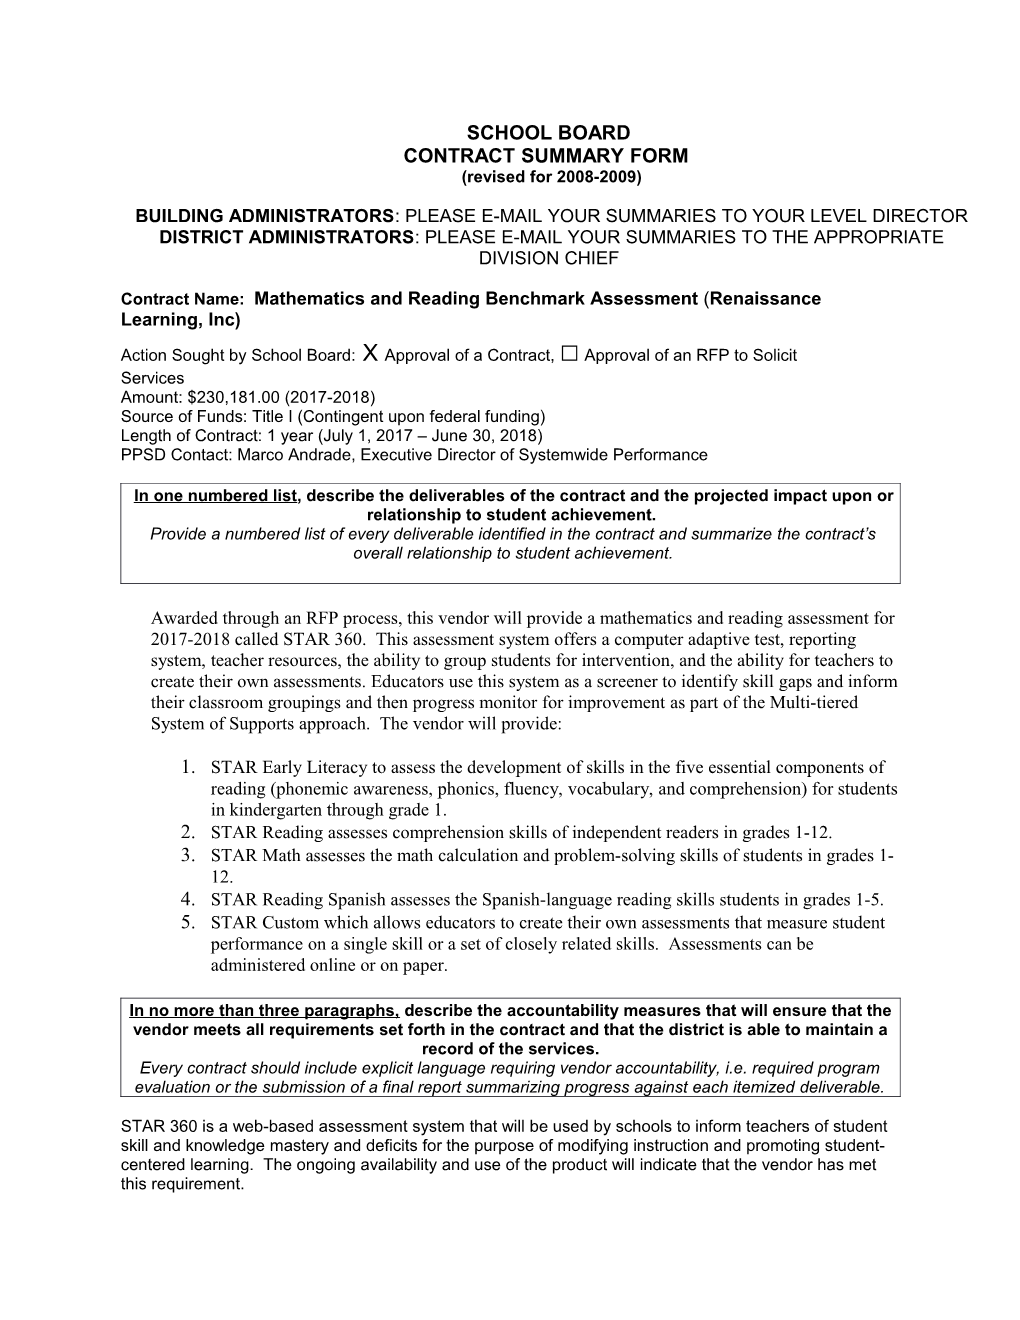 Contract Name: Mathematics and Reading Benchmark Assessment (Renaissance Learning, Inc)